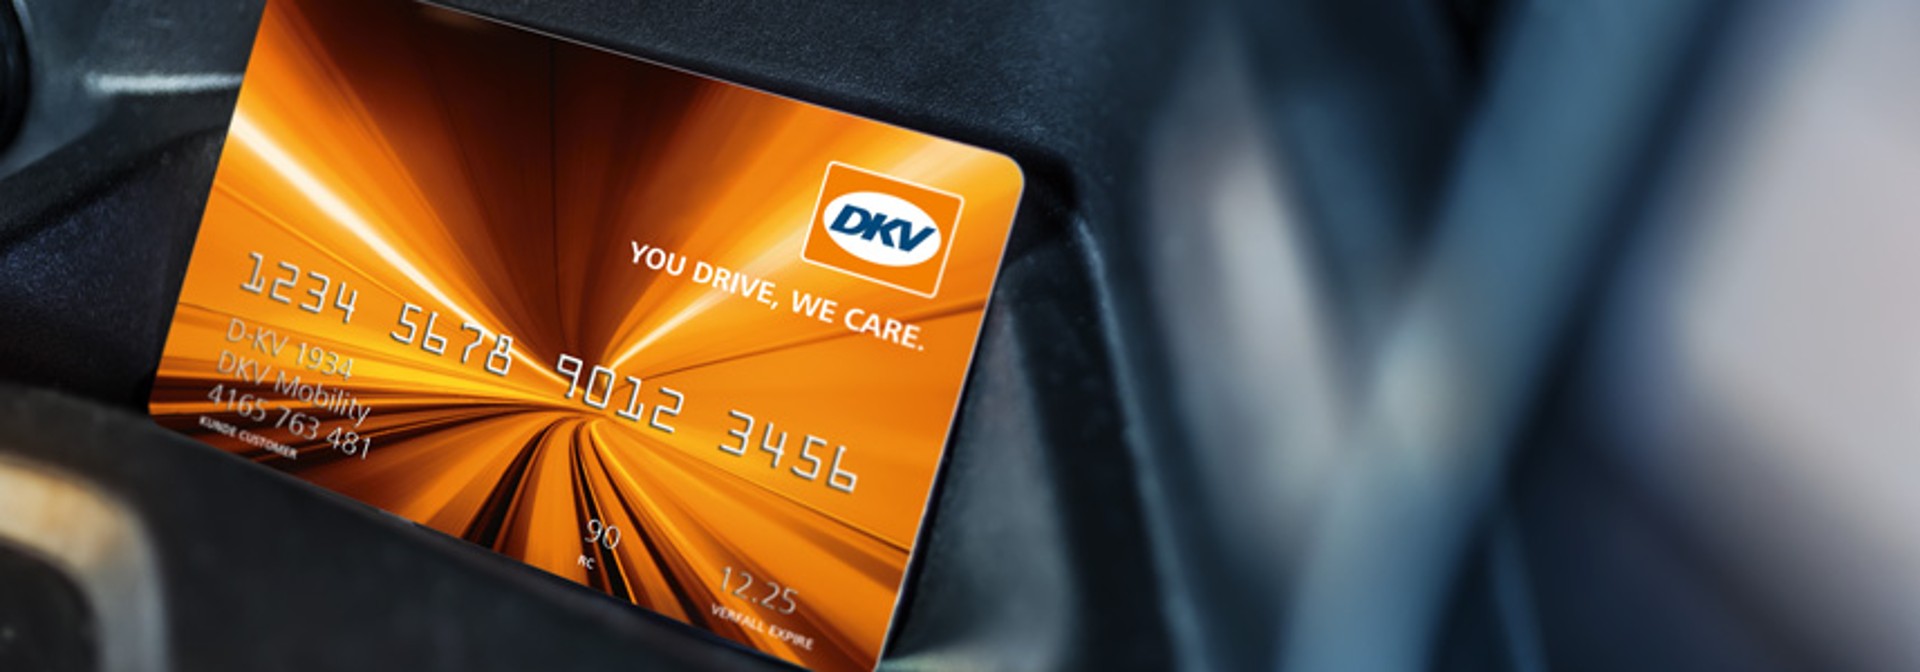 Pay with the DKV Card